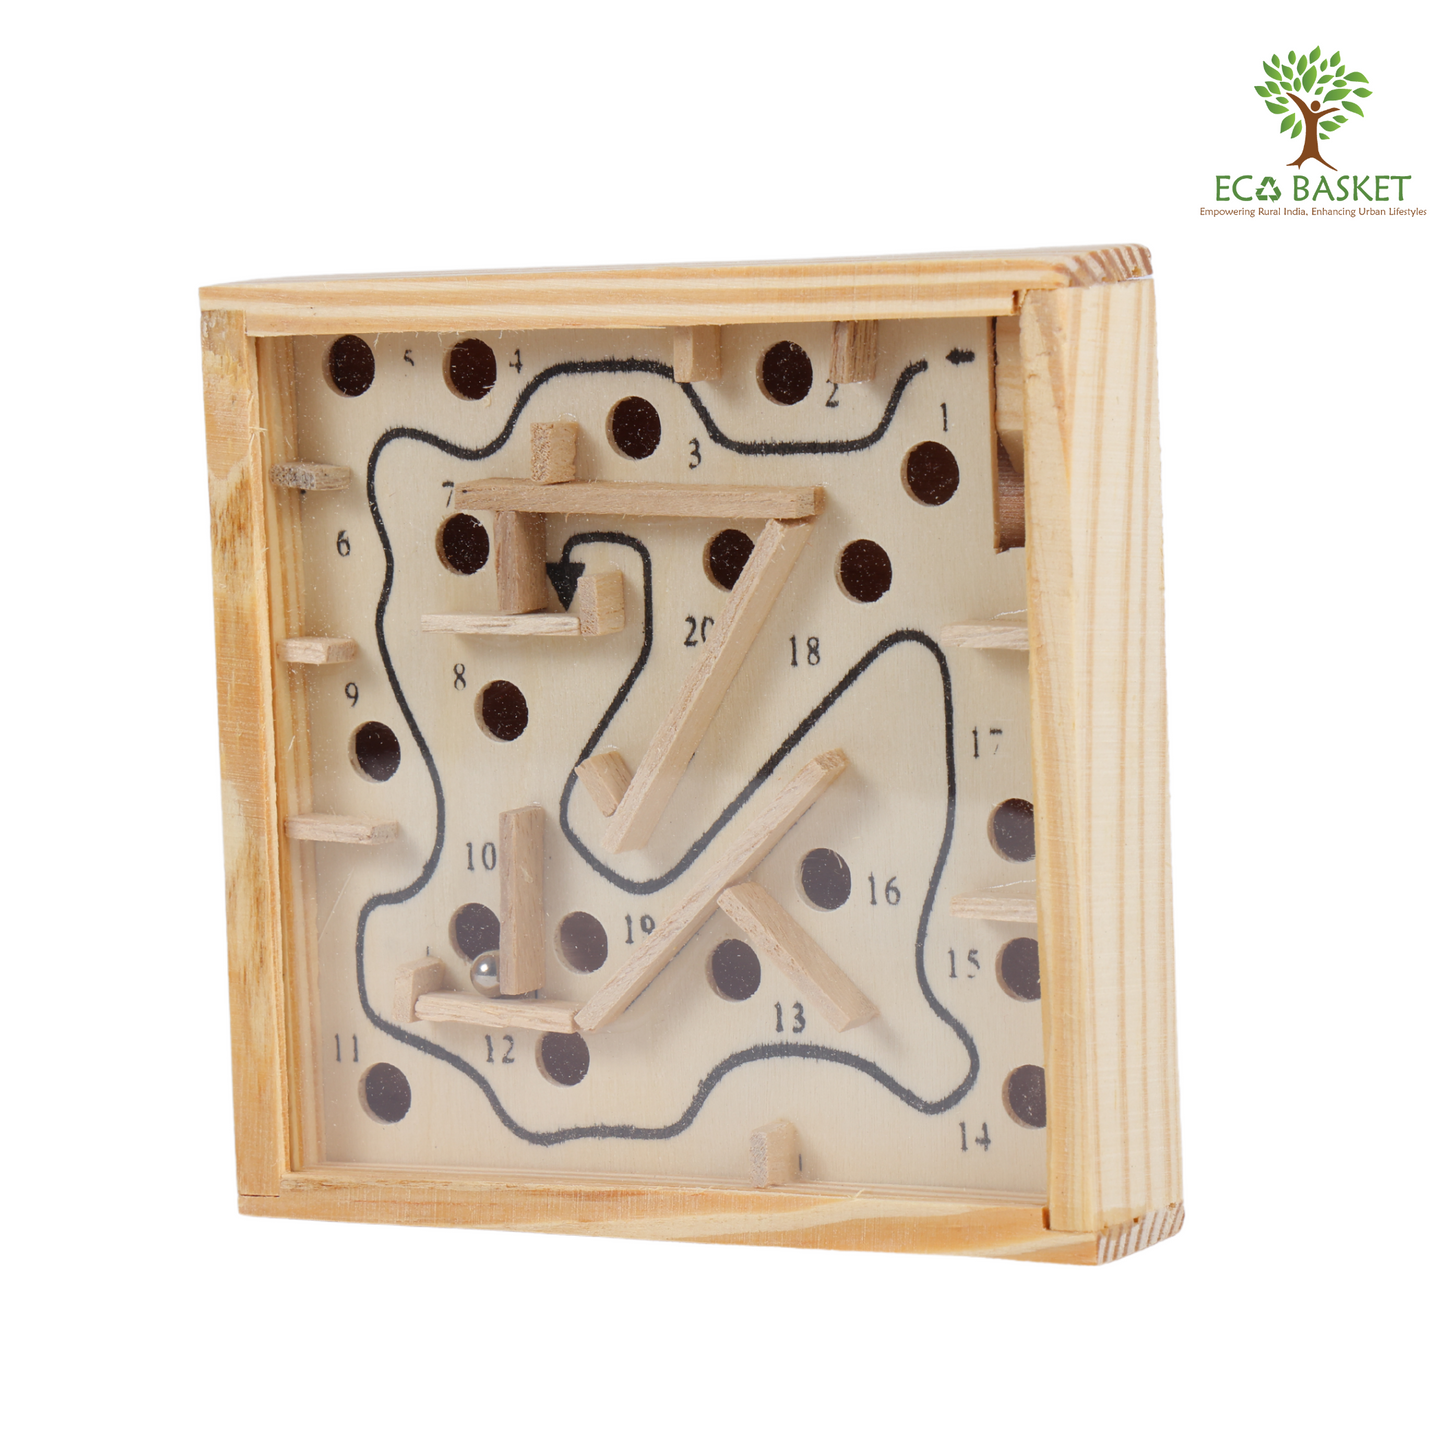 Wooden Ball Square Puzzle